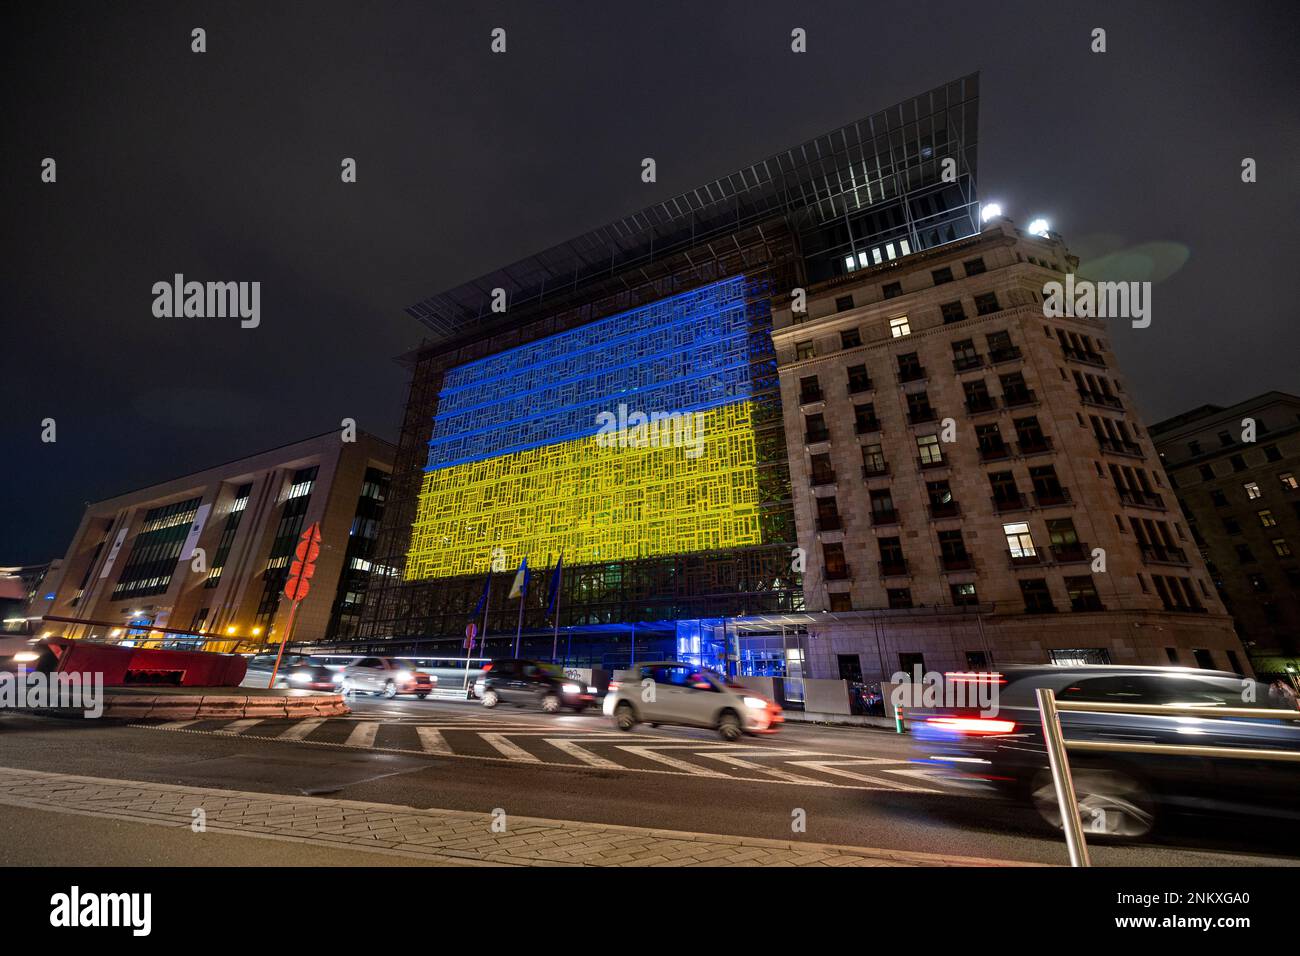 BRUSSELS, Belgium - February 23, 2023: seat of the European Council, with the Ukrainian flag projected on the facade in solidarity with Ukraine Stock Photo